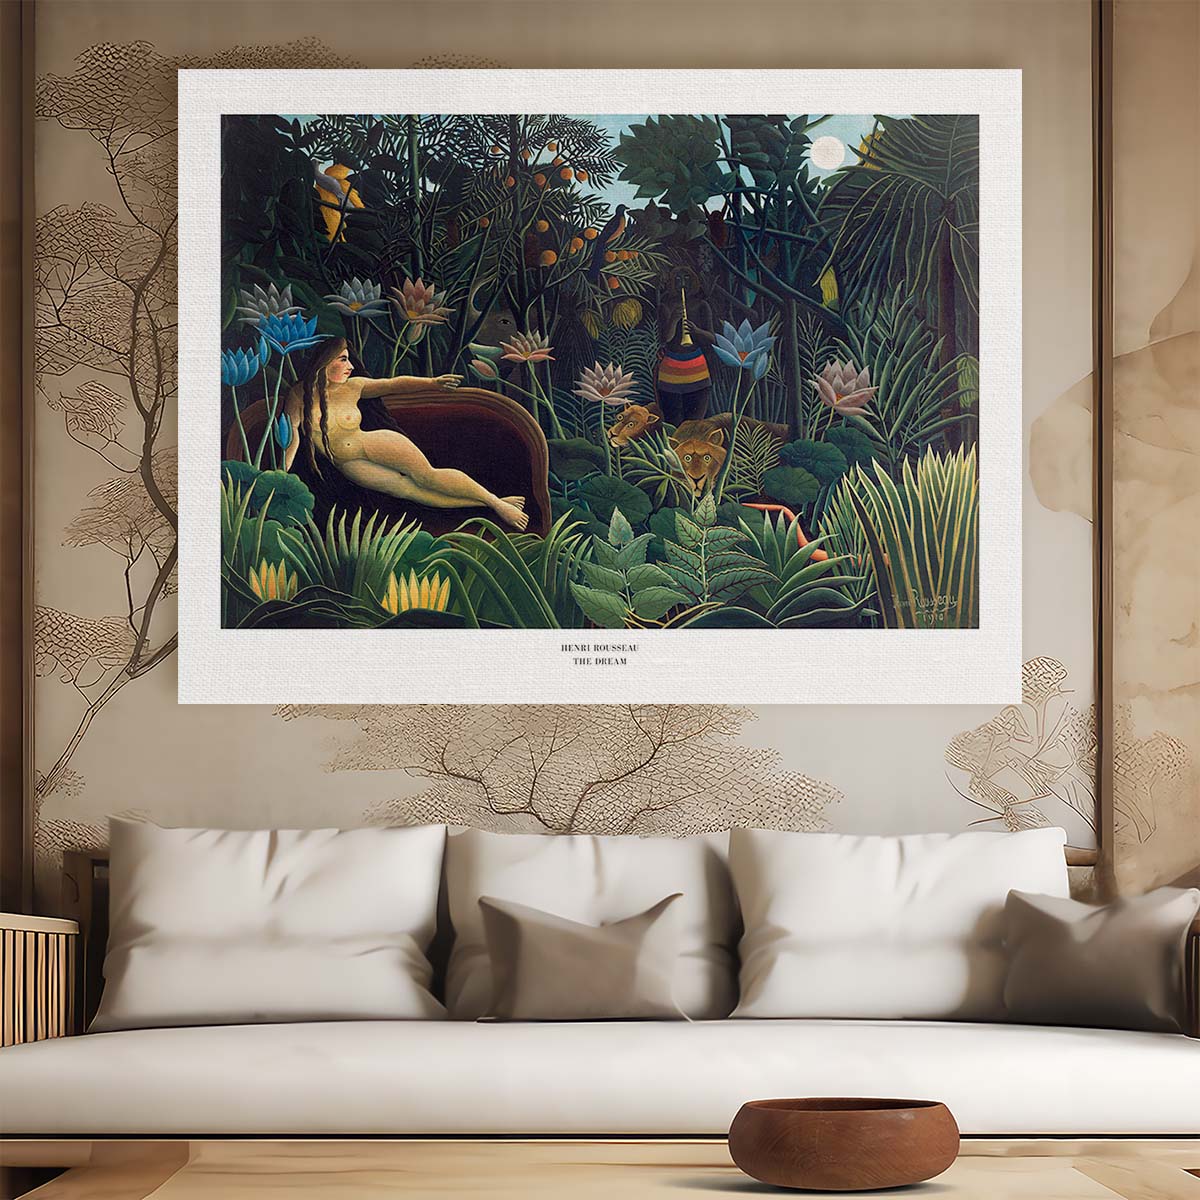 Henri Rousseau's Dreamy Forest Landscape Acrylic Wall Art by Luxuriance Designs. Made in USA.